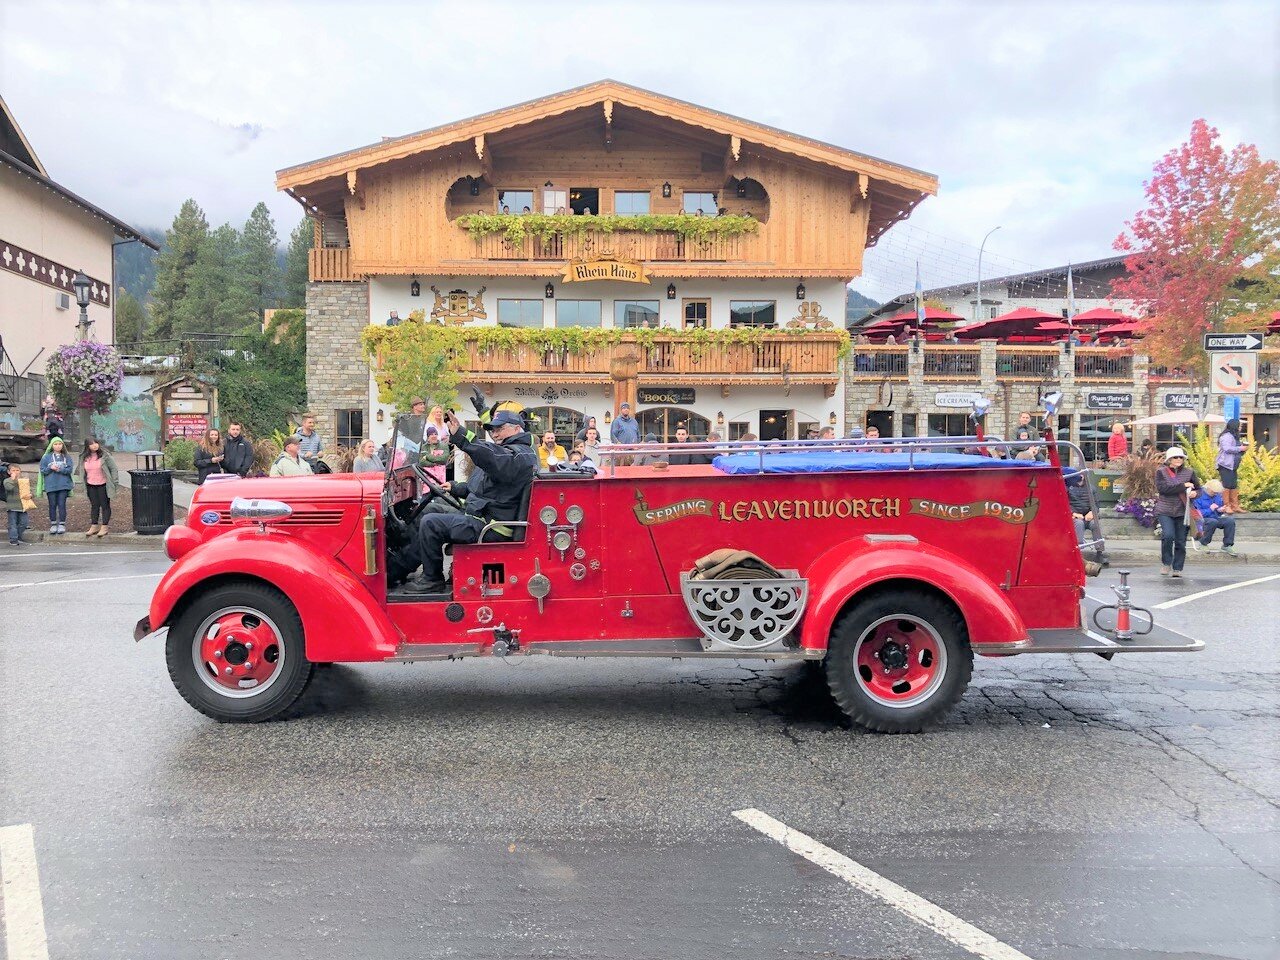 The museum expansion could mean the possibility of putting the fully-restored 1939 City of Leavenworth fire truck on display.